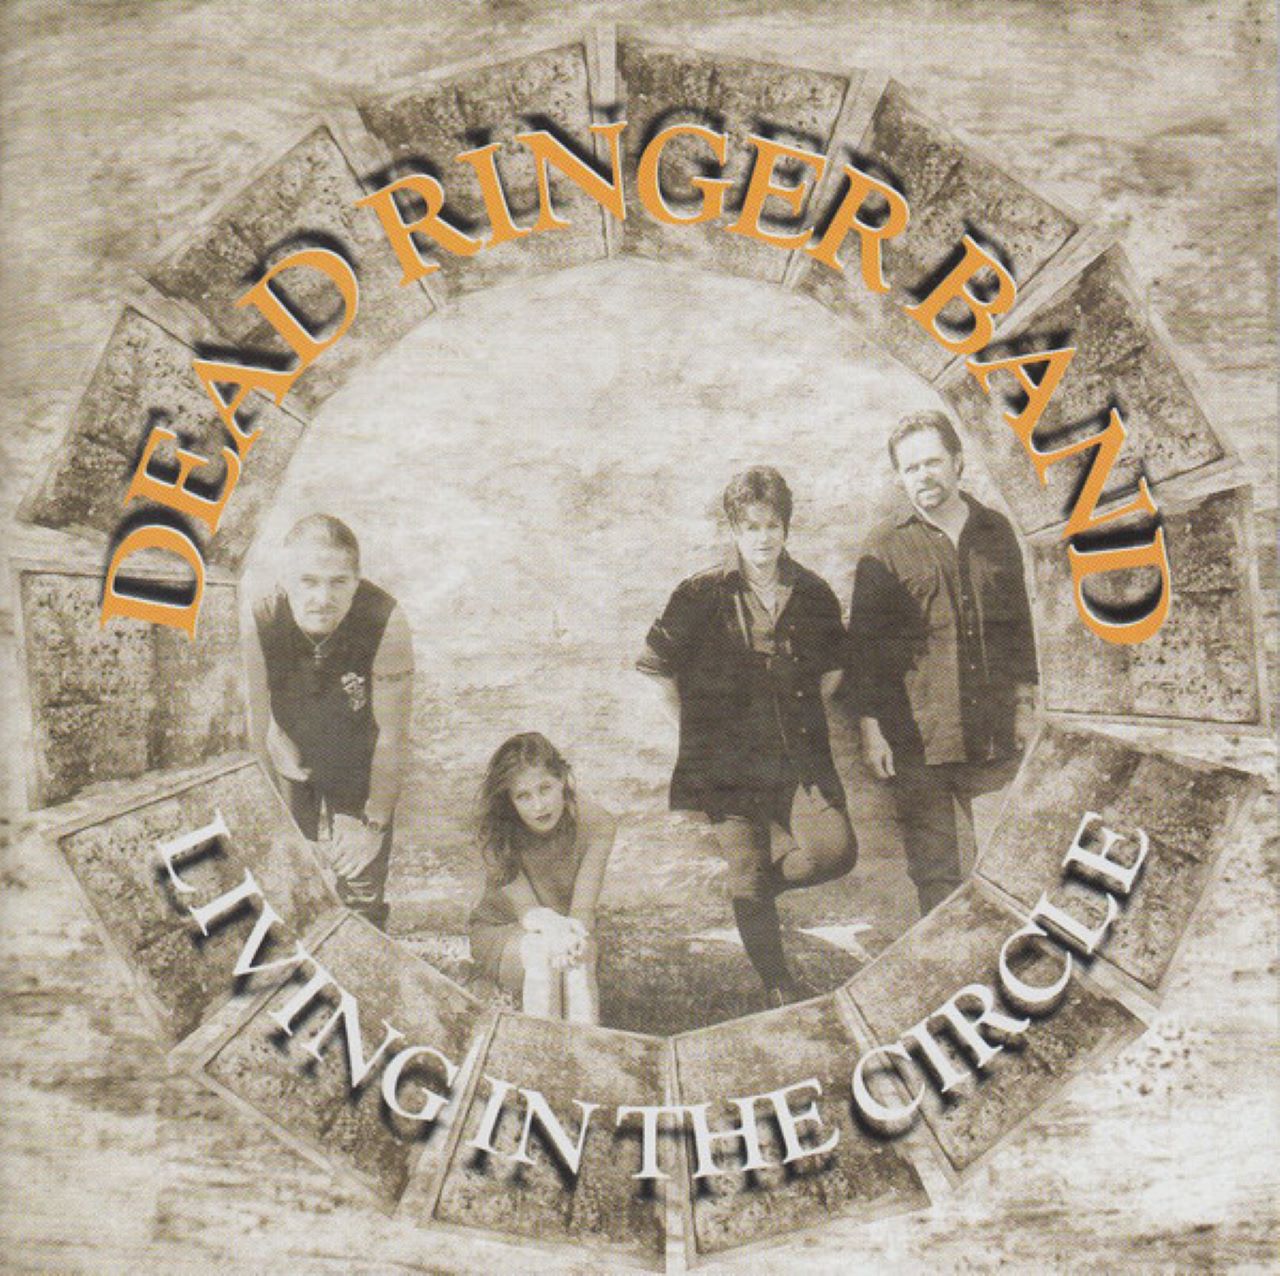 Dead Ringer Band - Living In The Circle cover album